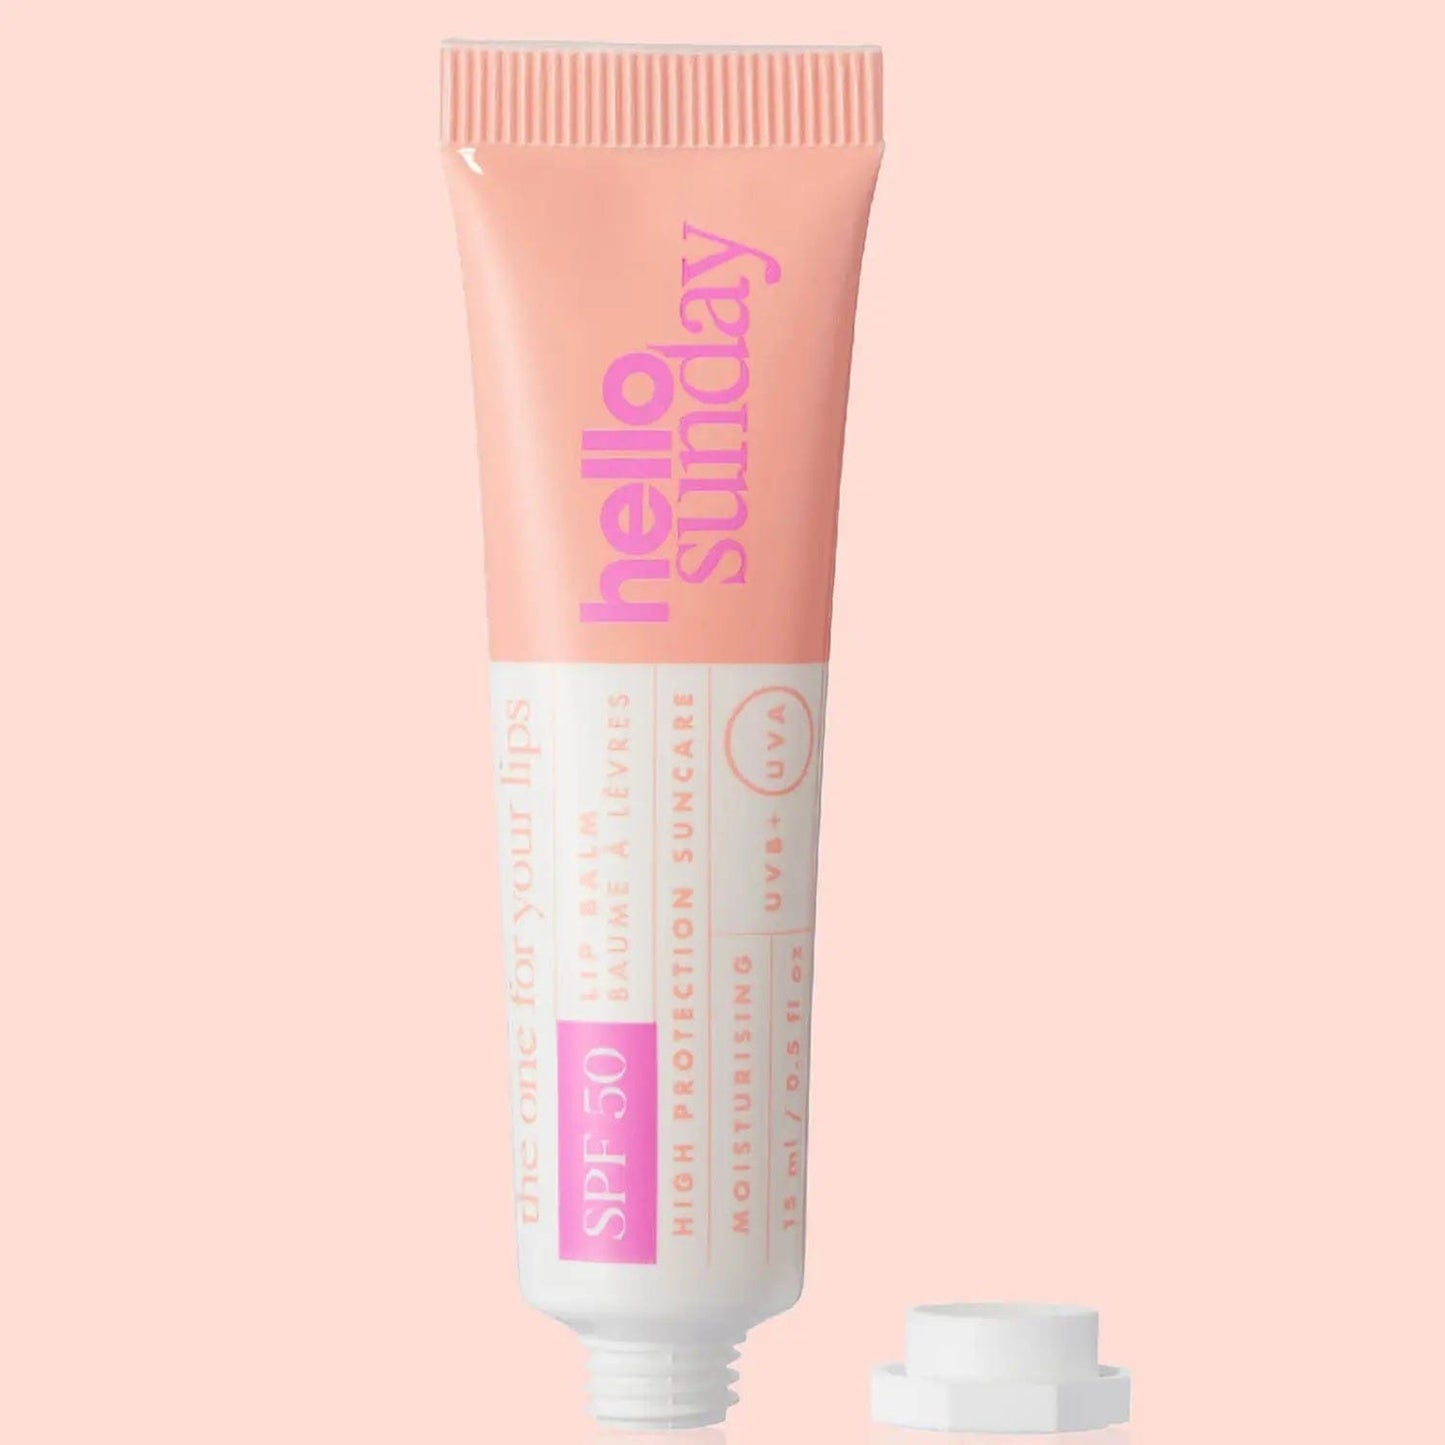 Hello Sunday Beauty Hello Sunday The One For Your Lips – Fragrance Free Lip Balm SPF50